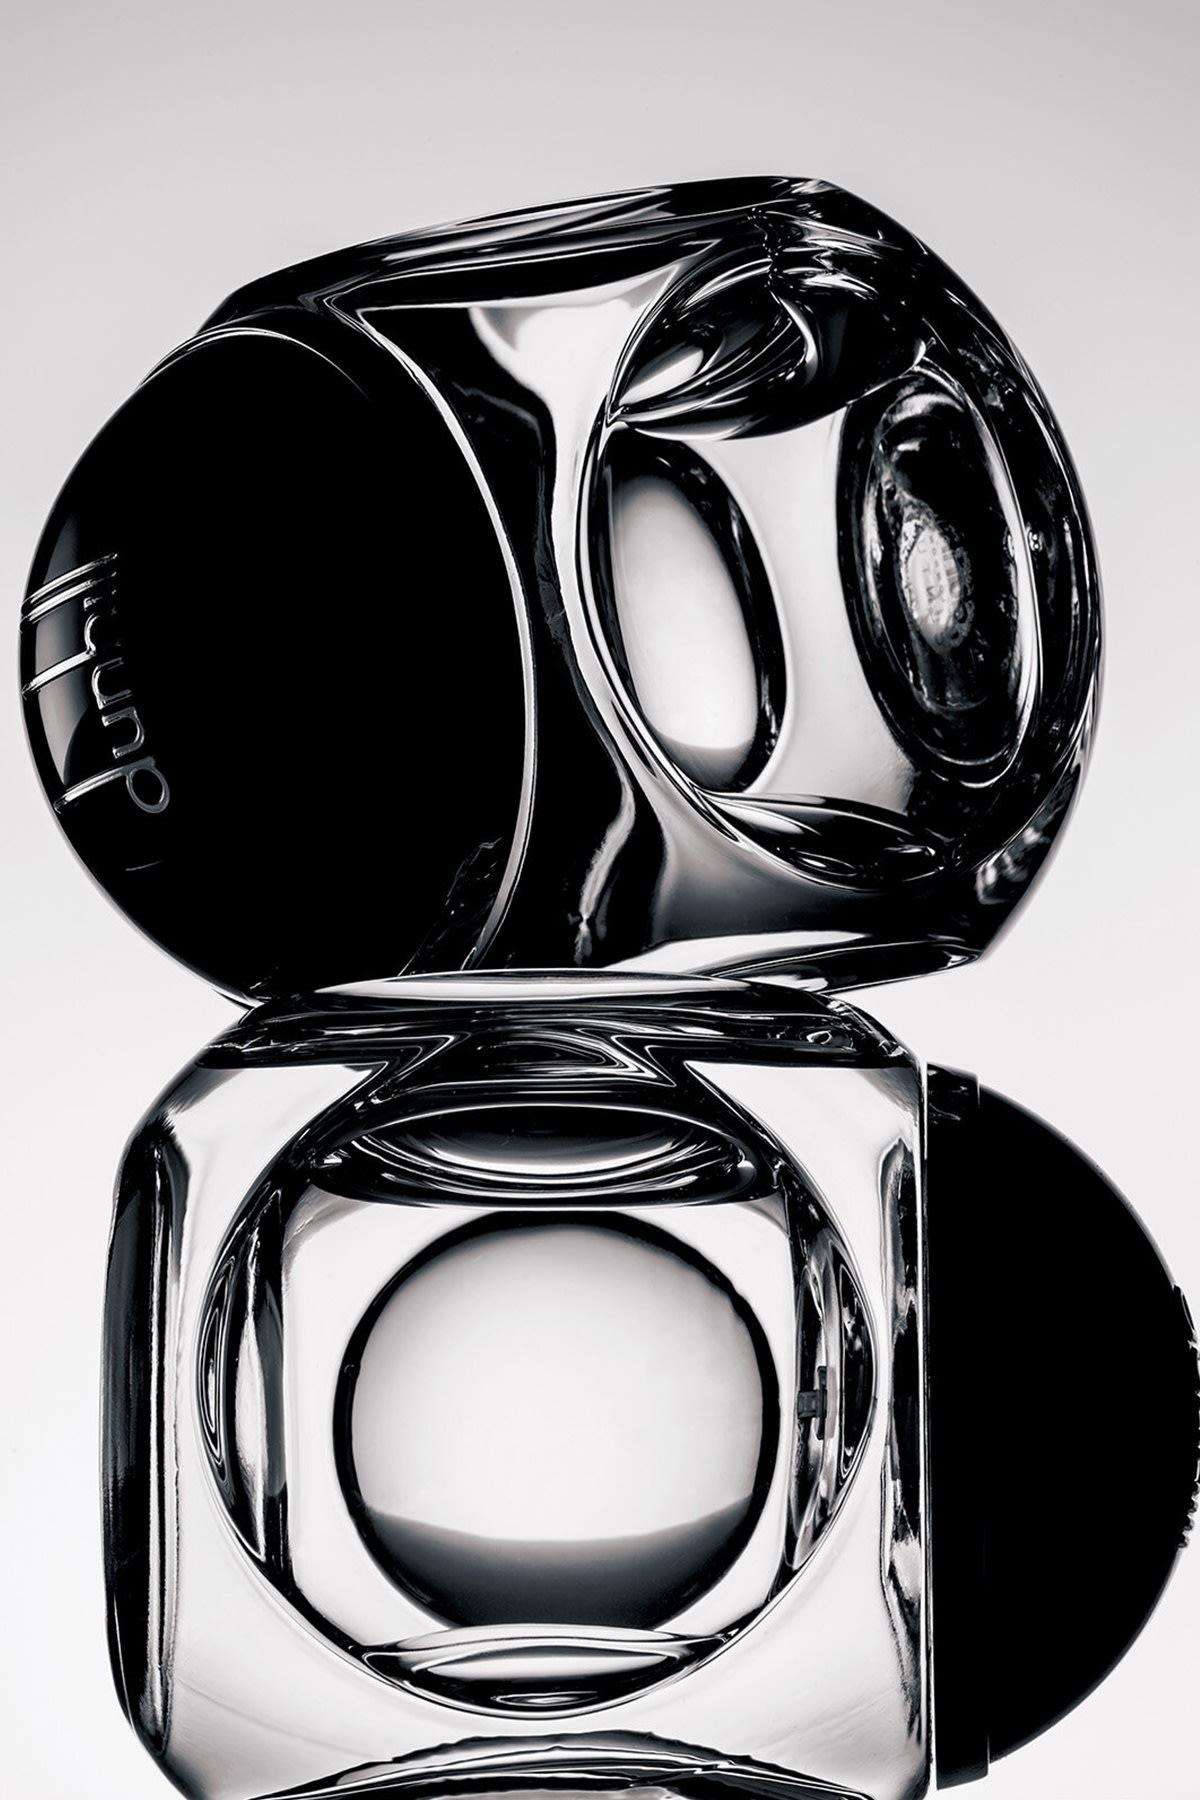 Two Dunhill Century fragrance bottles, both on their sides, balanced on top of each other, in black and white. 